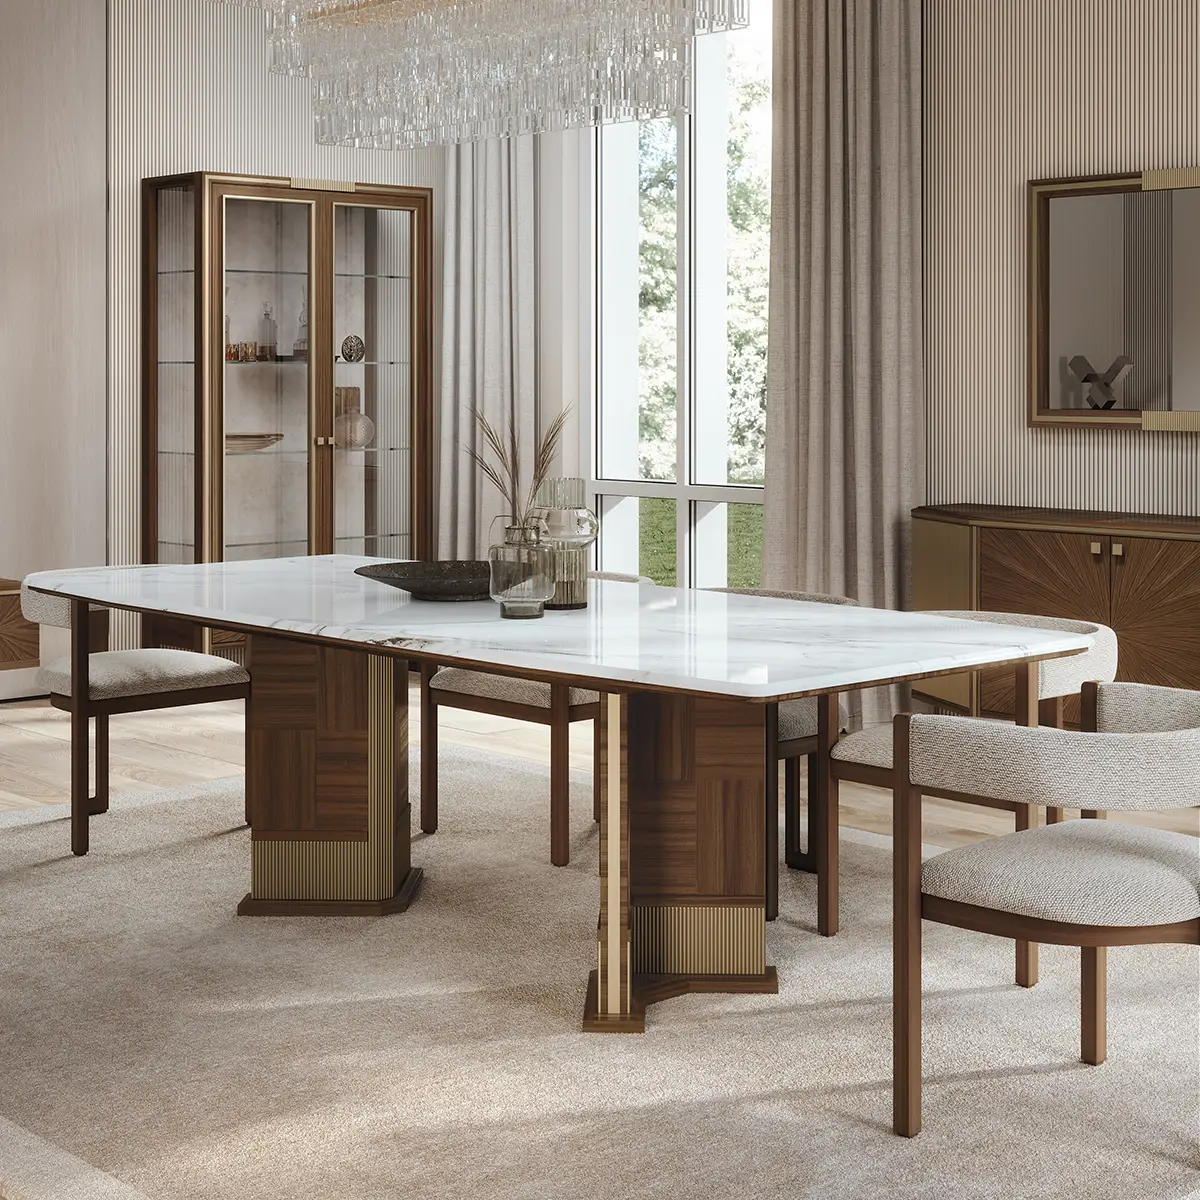 Brera table with marble top